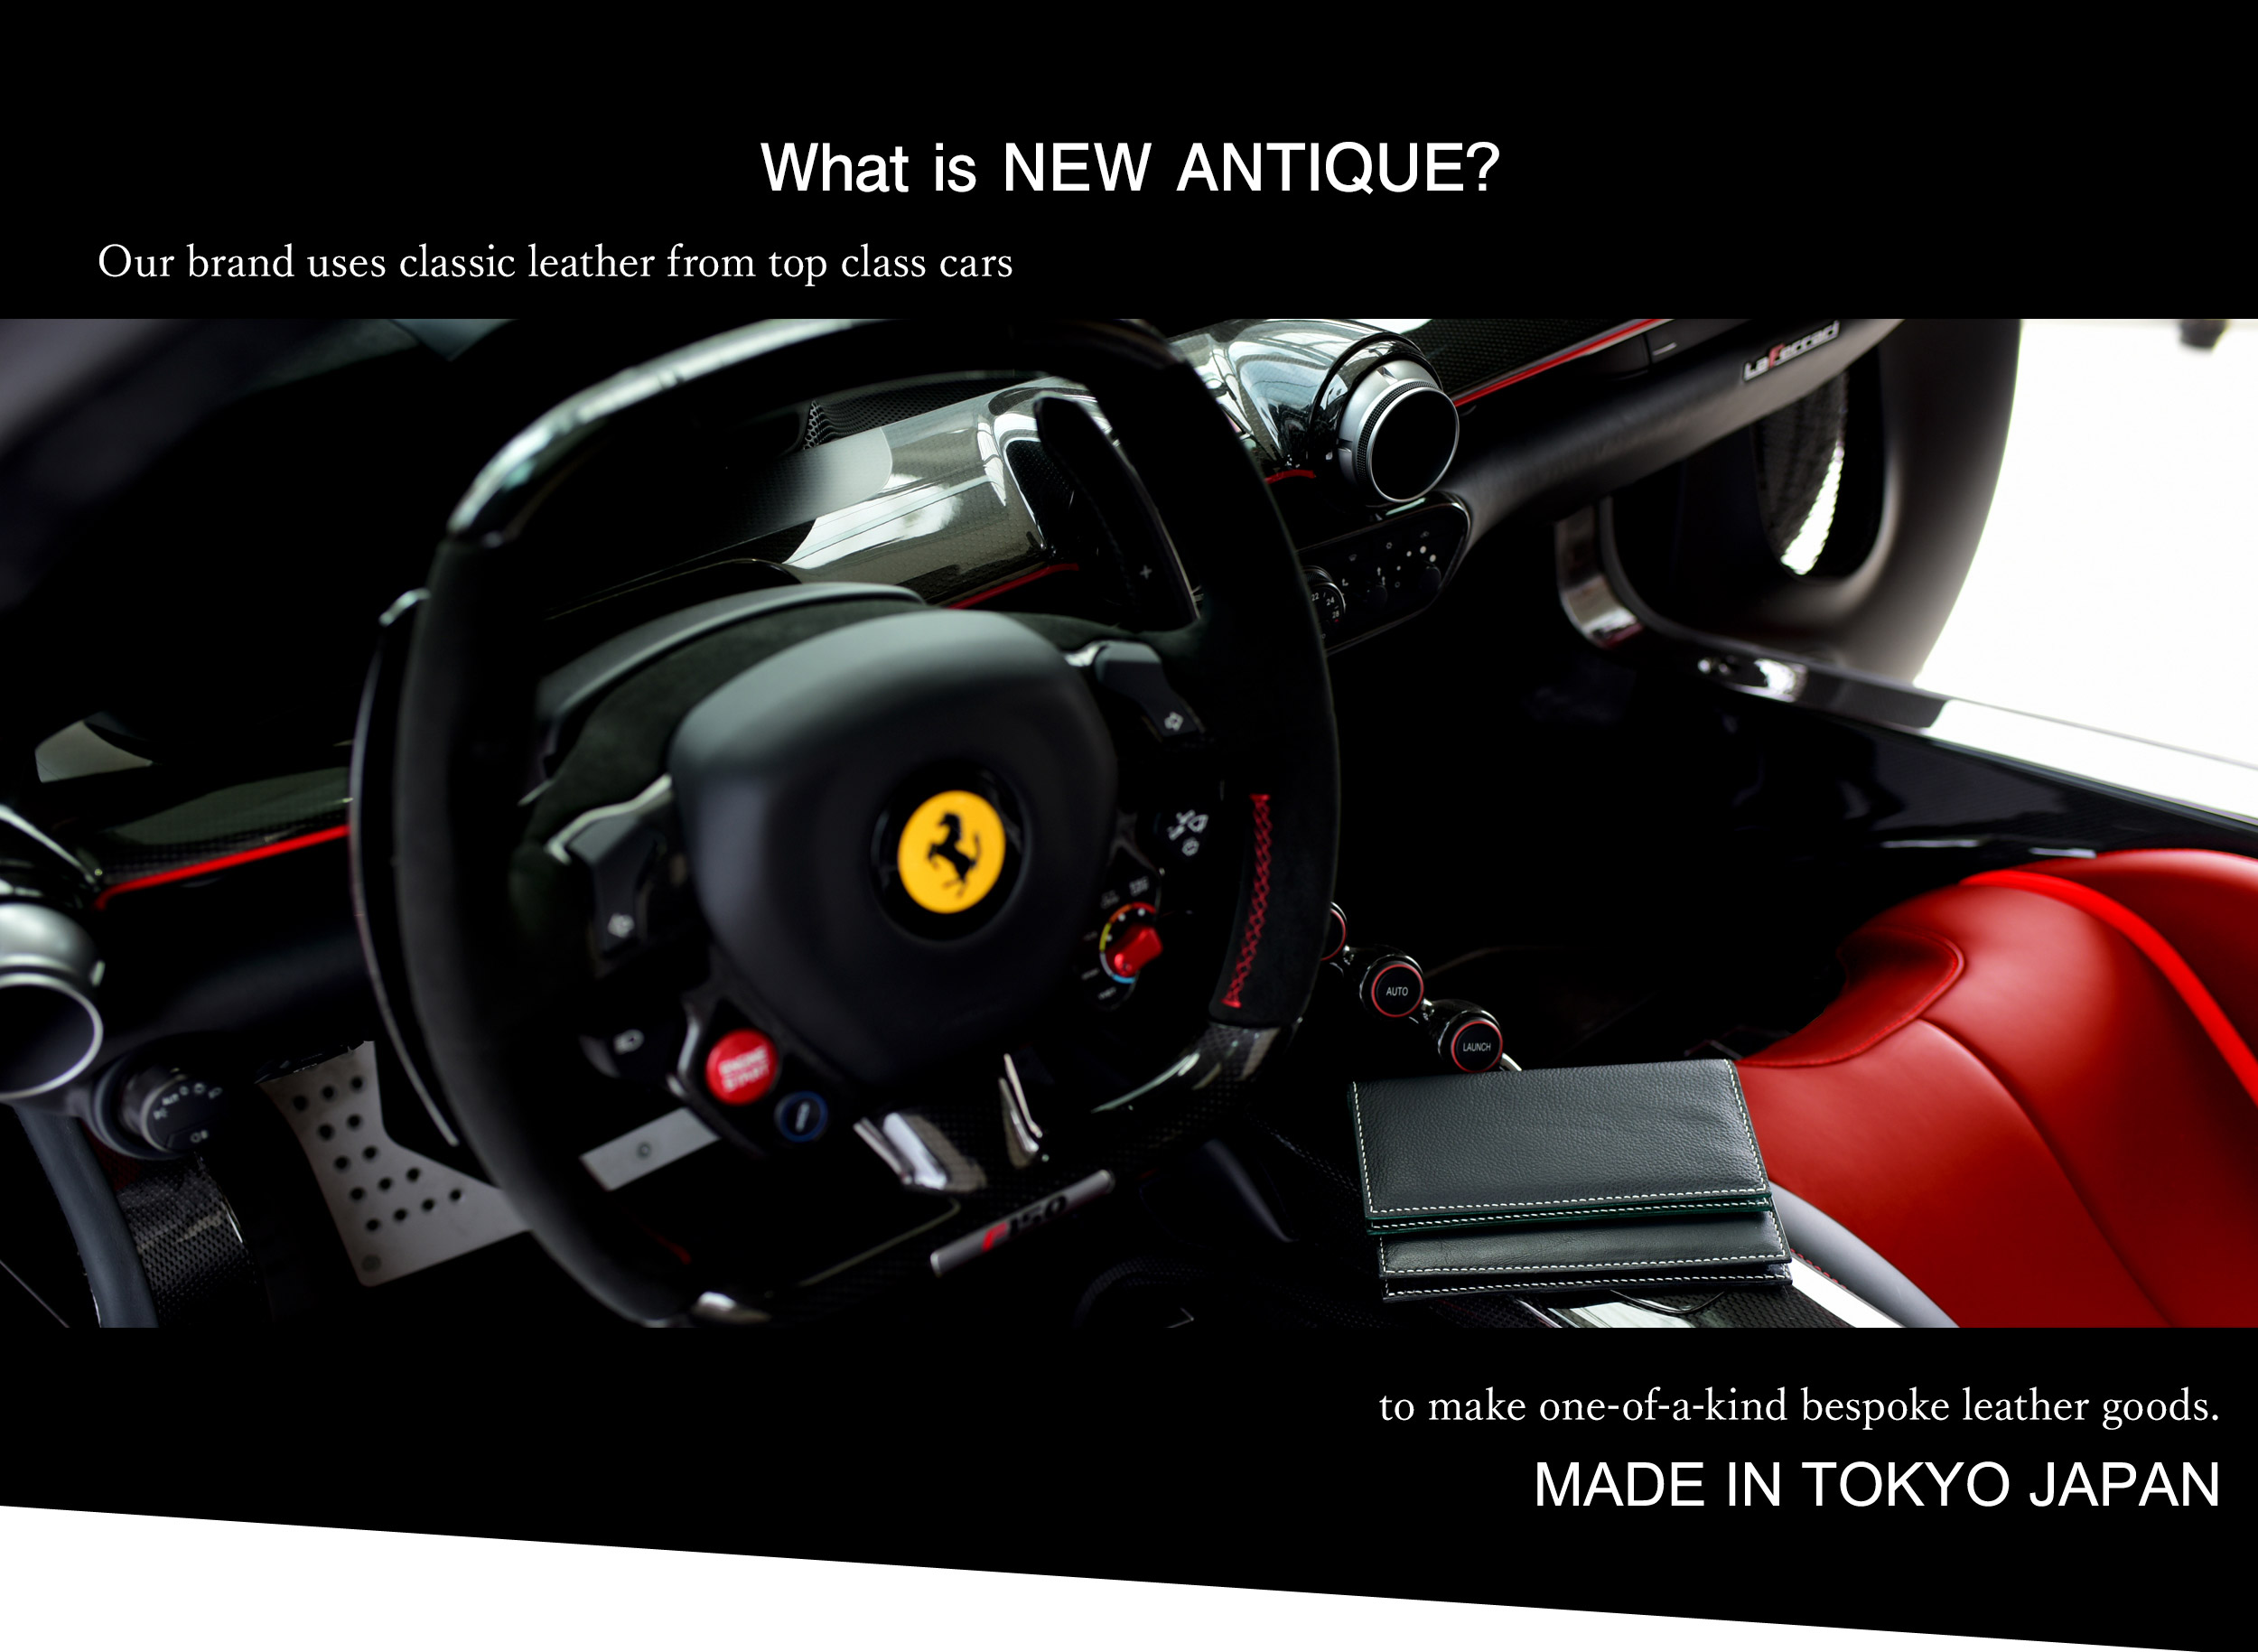 NEW What is NEW ANTIQUE?Our brand uses classic leather from top class cars to make one-of-a-kind bespoke leather goods.